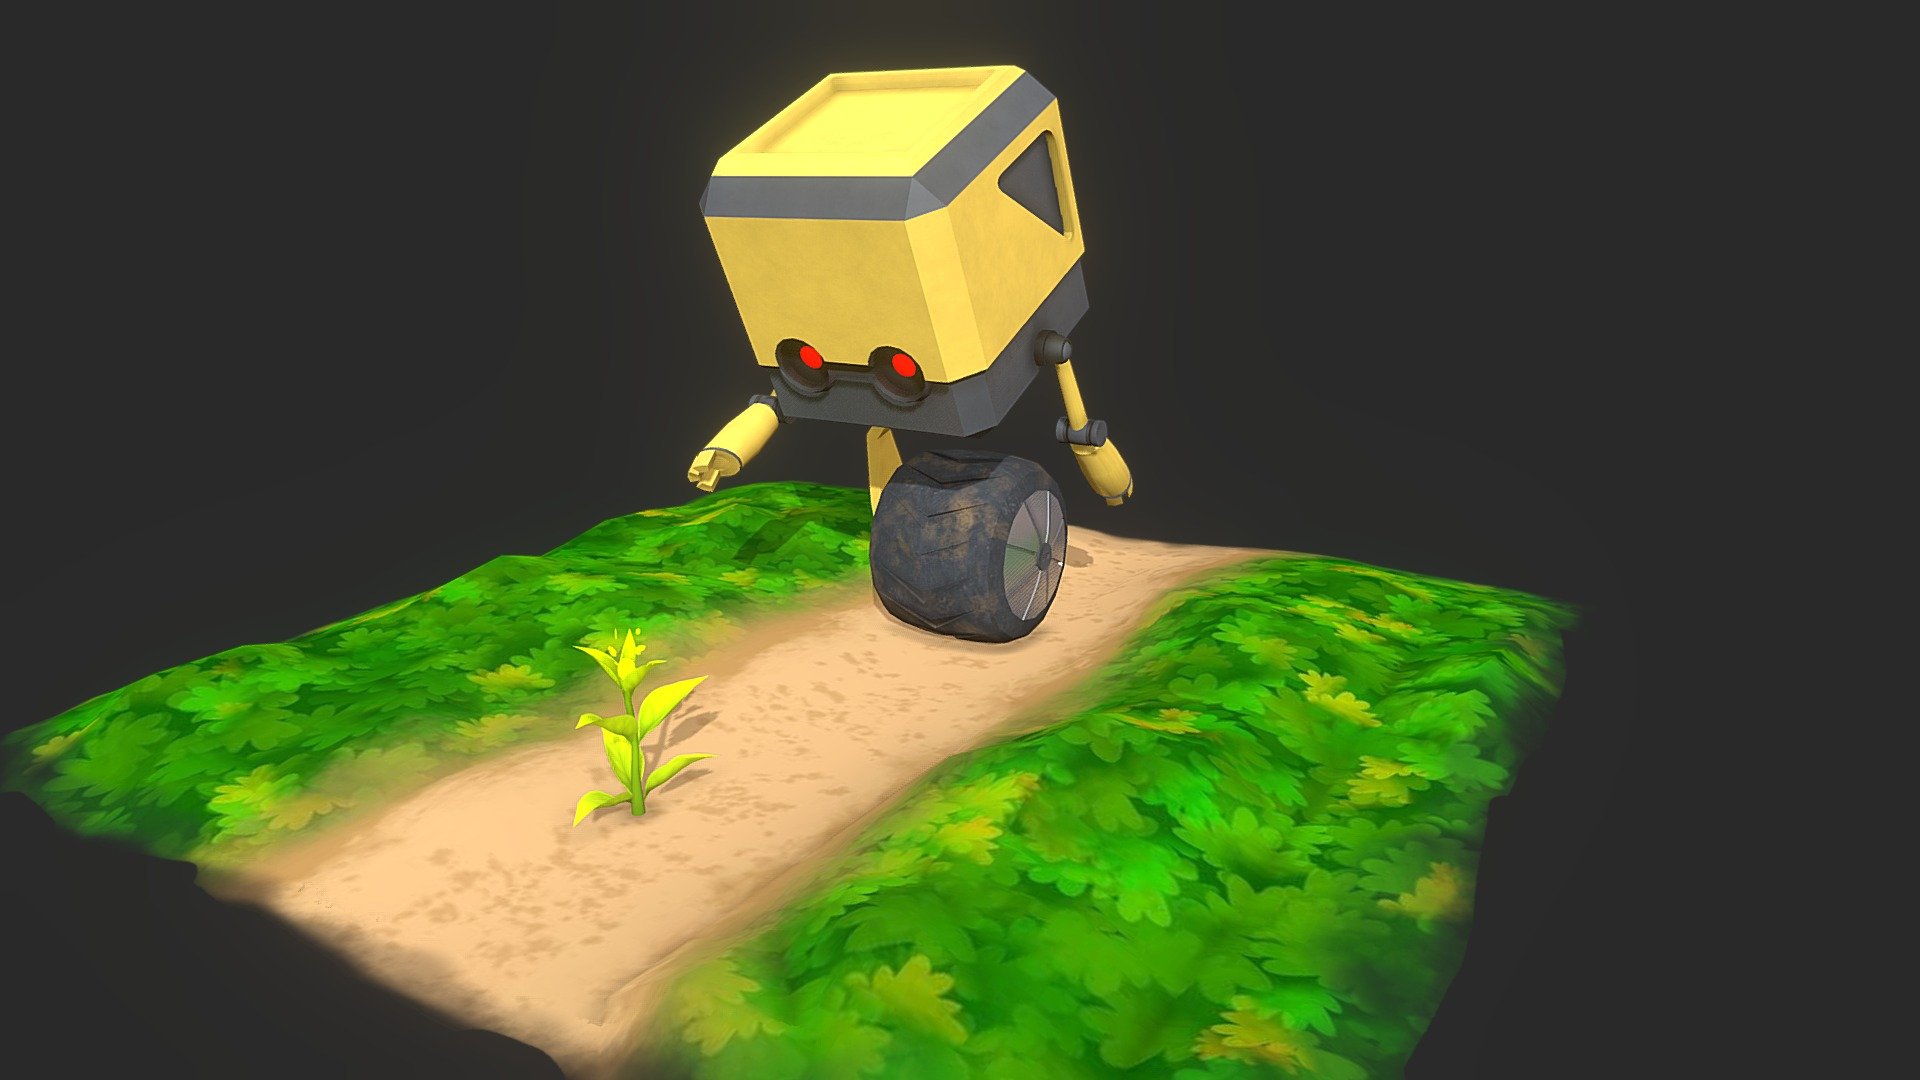 I made this low-poly robot using BLENDER &amp; KRITA.
Hope you like it.
Download original Blender file here: 
https://ko-fi.com/satendra5286/shop
Ckeck the small video of making here: https://www.youtube.com/watch?v=GY5ji7Xj70Y - Low poly Robot - Download Free 3D model by Satendra Saraswat (@satendra5286) 3d model